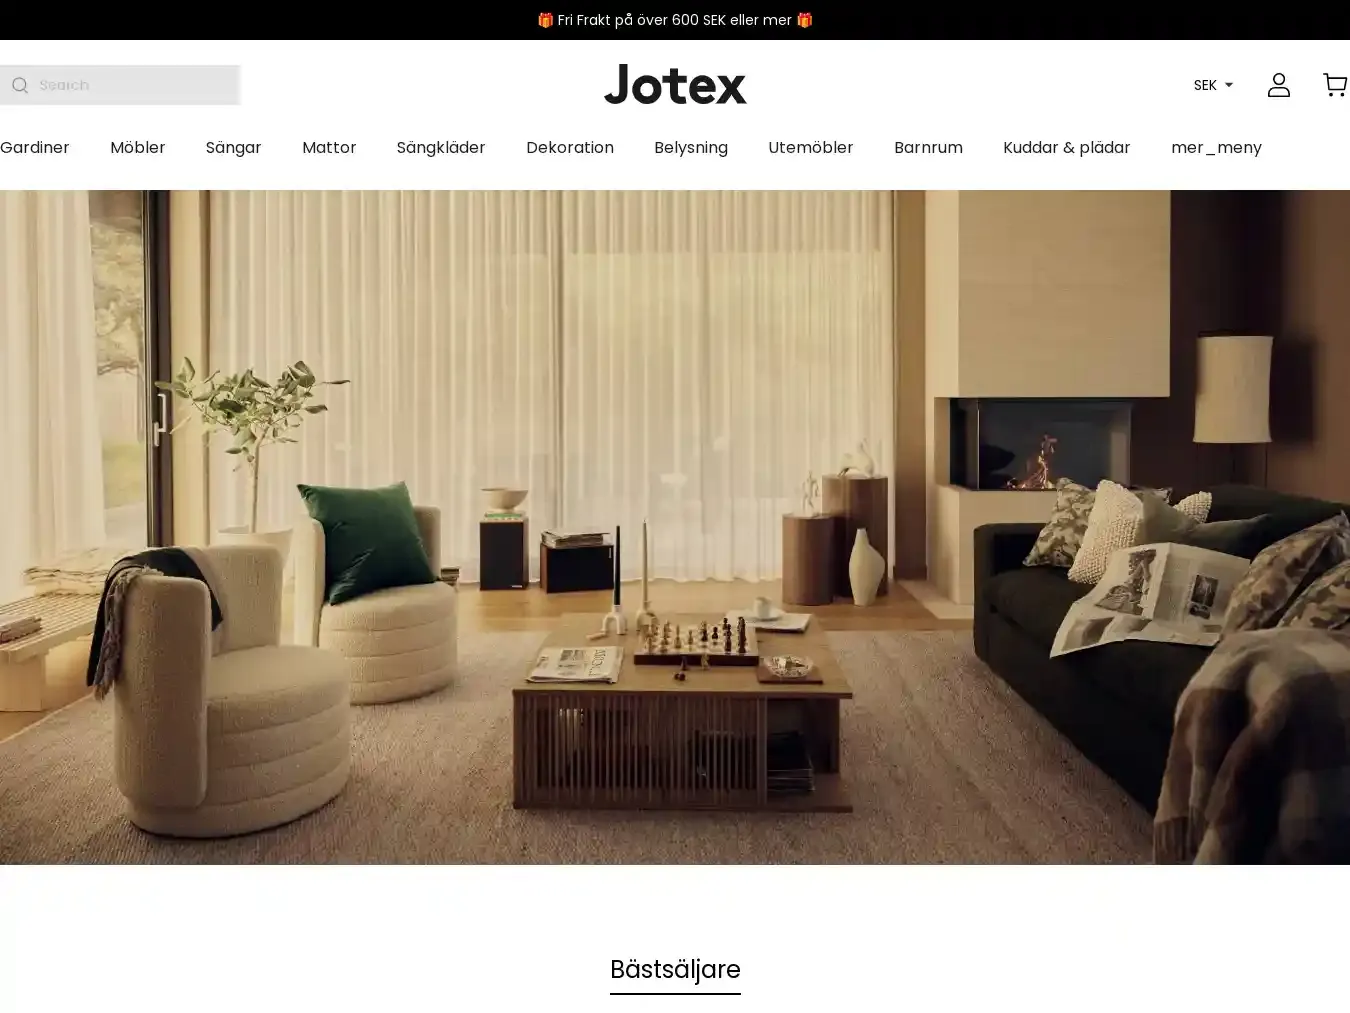 Jotexse.shop Fraudulent Non-Delivery website.